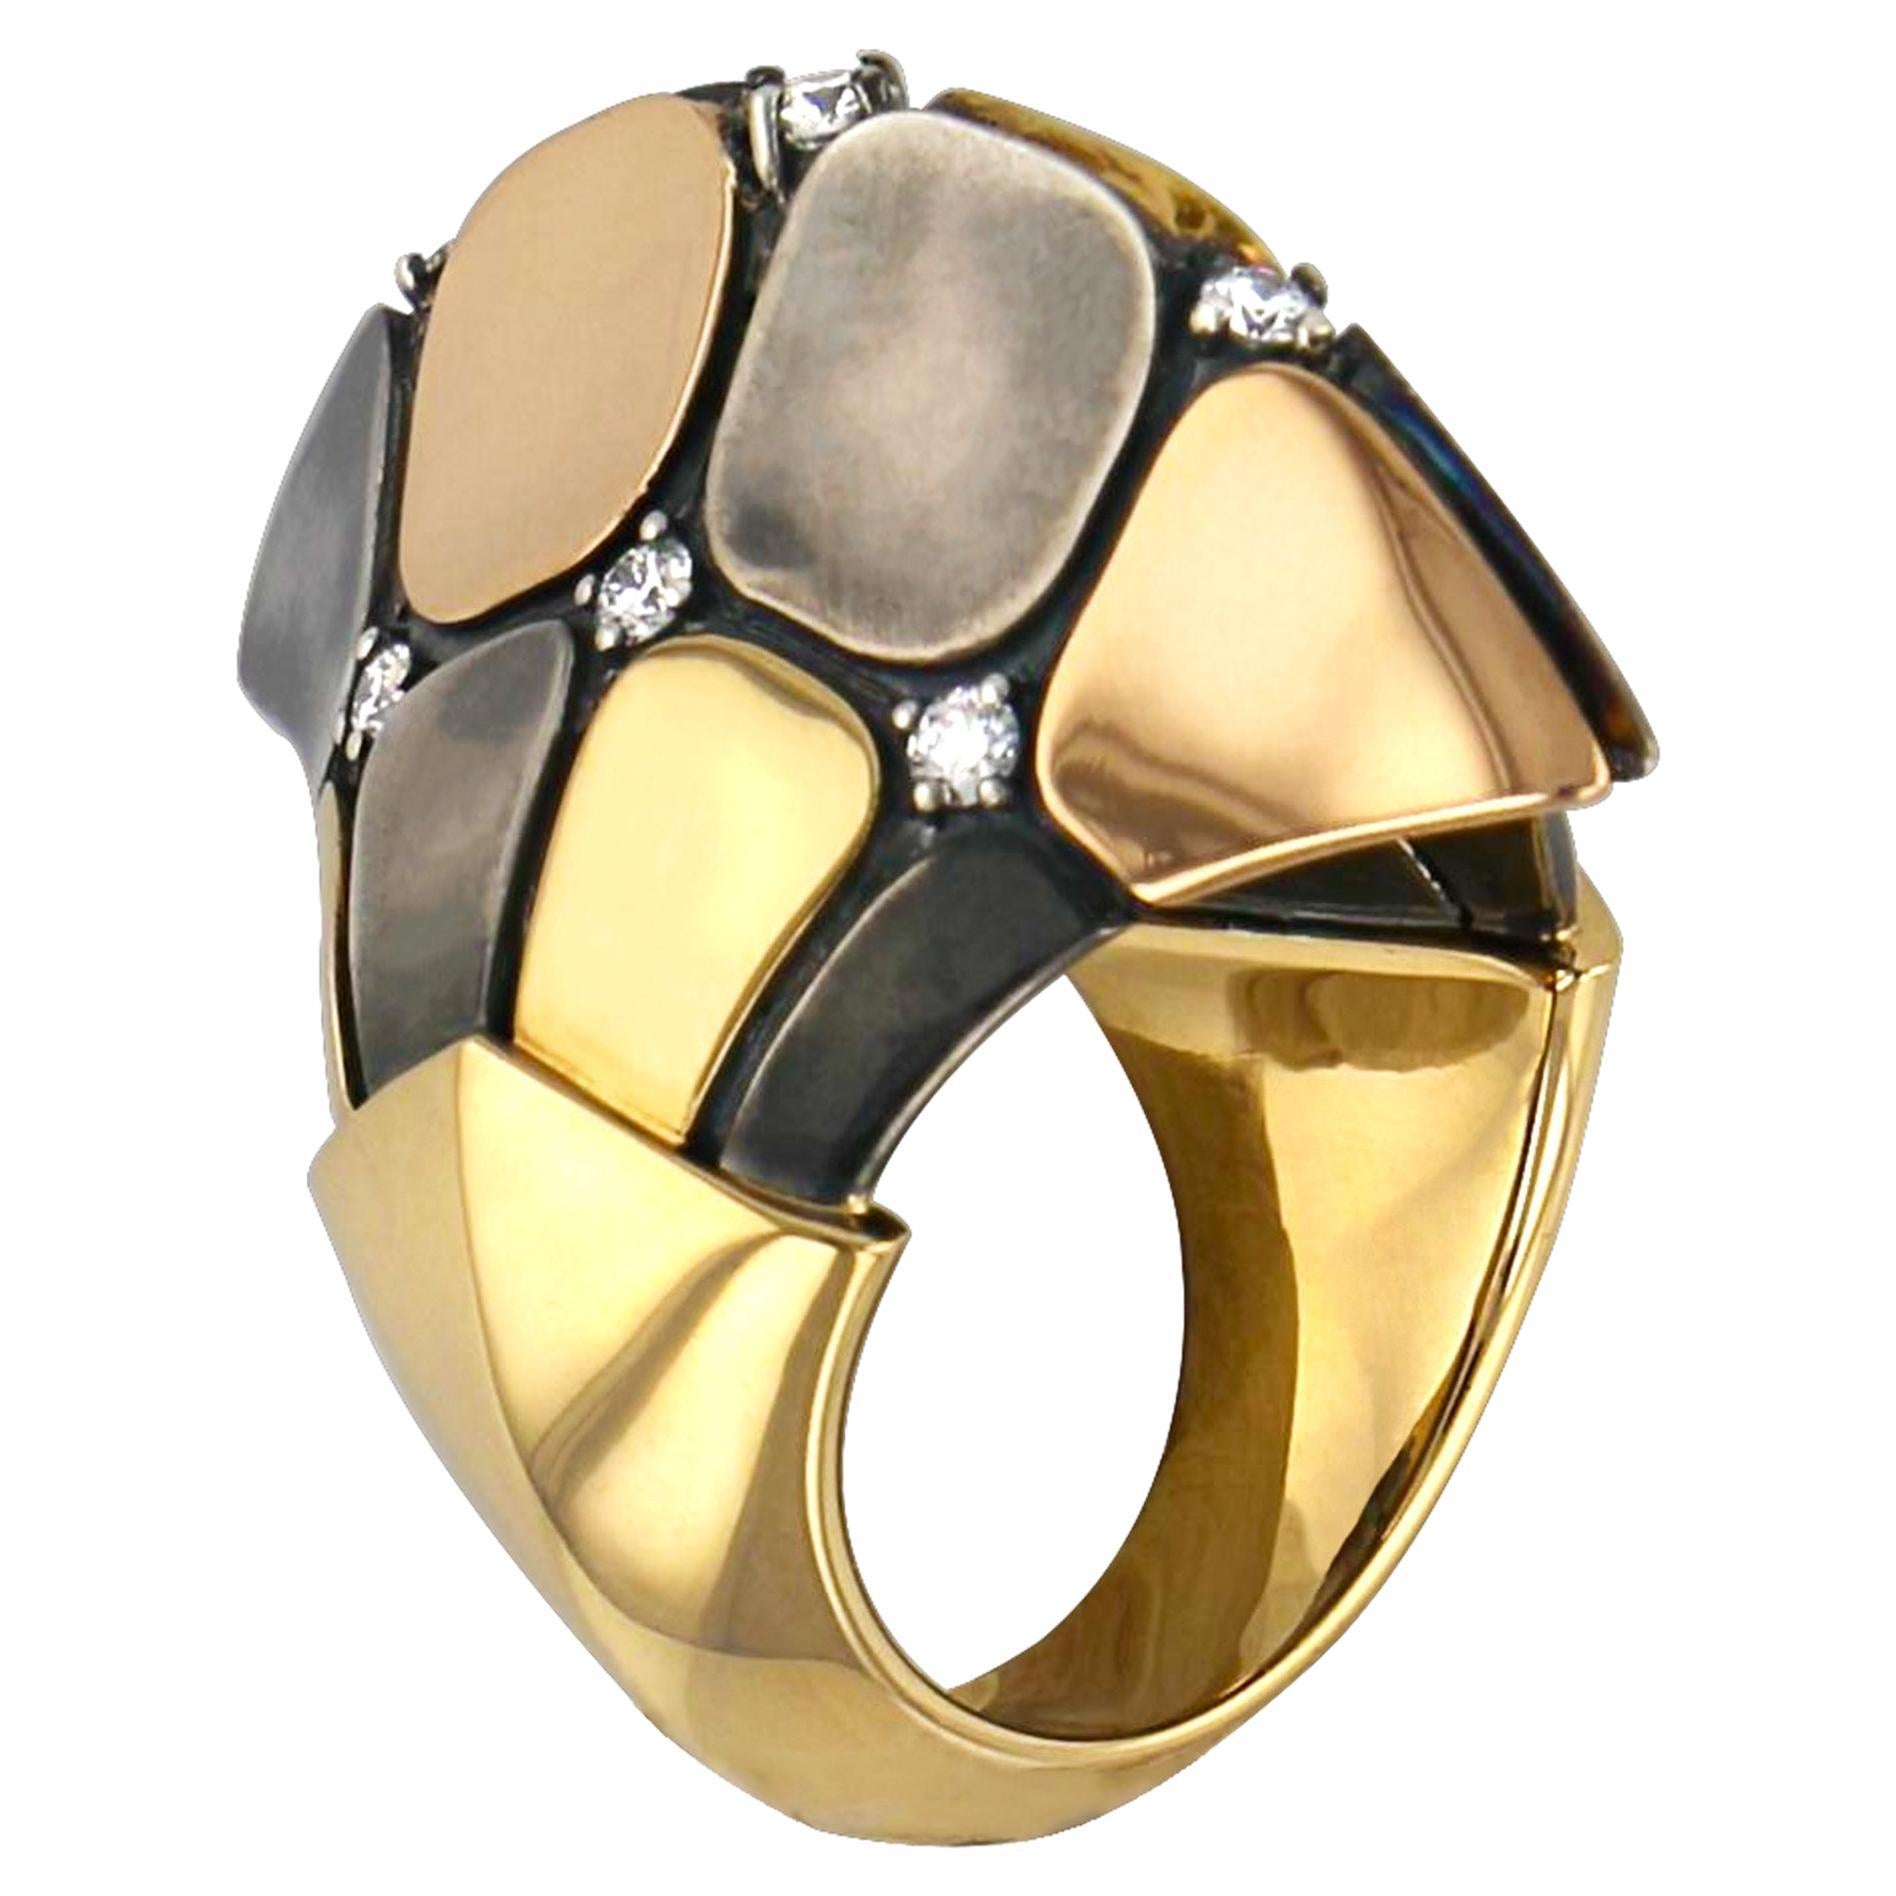 Diamond Dorsal Ring in 18k Yellow & Rose Gold by Elie Top